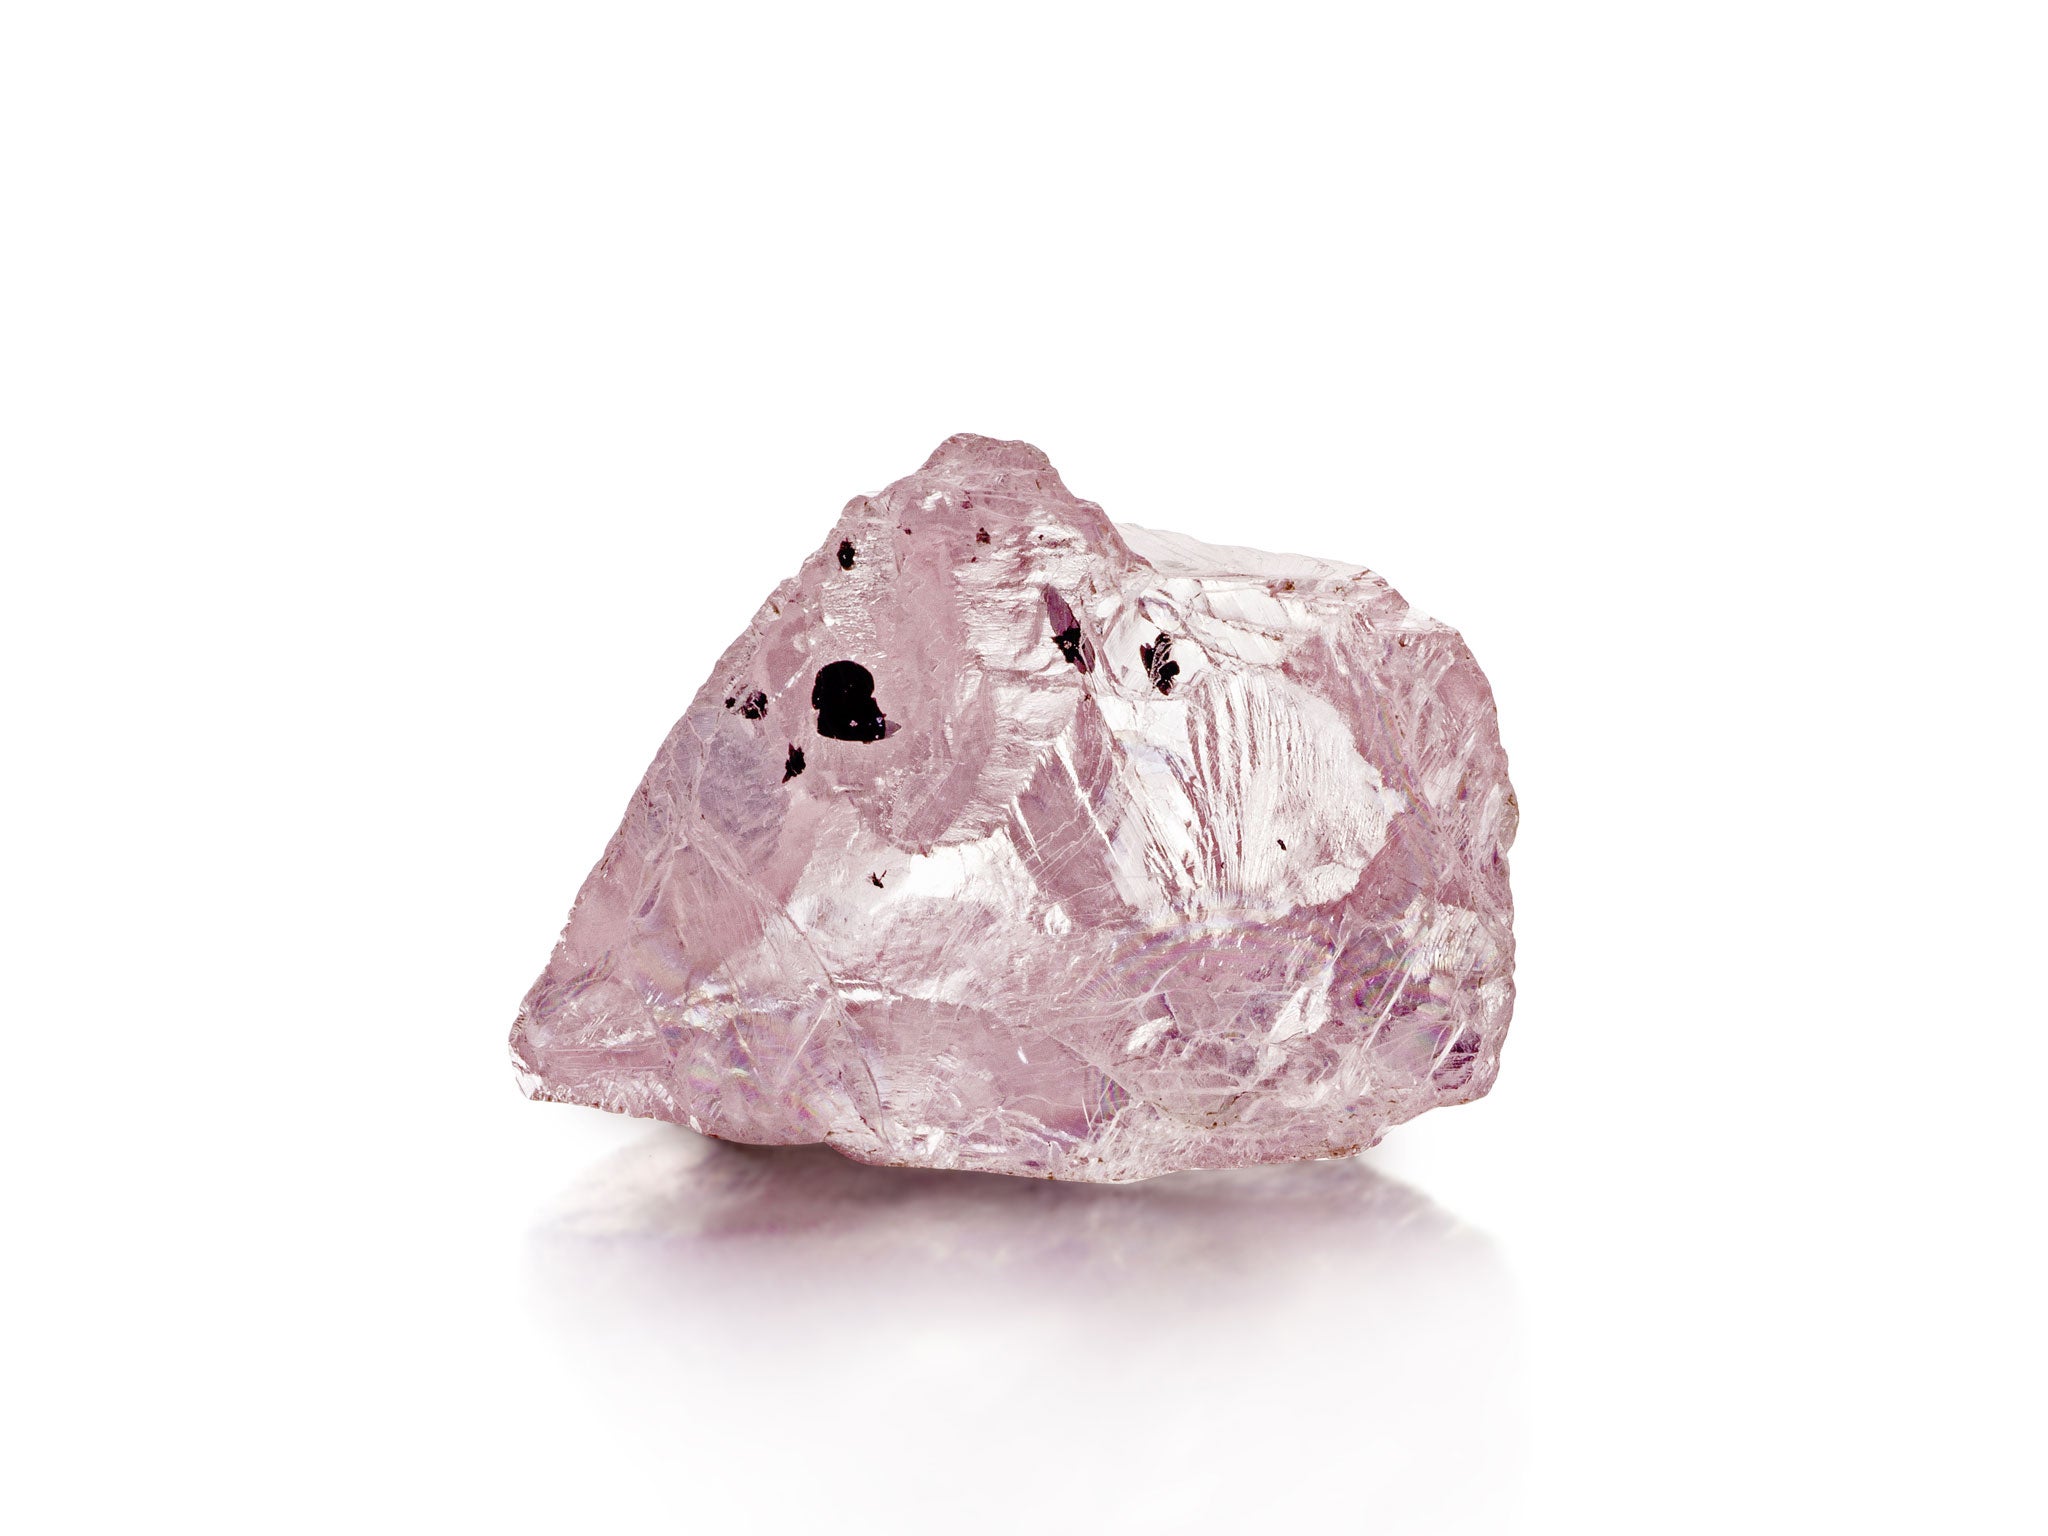 Recovery of 23 carat Pink Diamond at Williamson